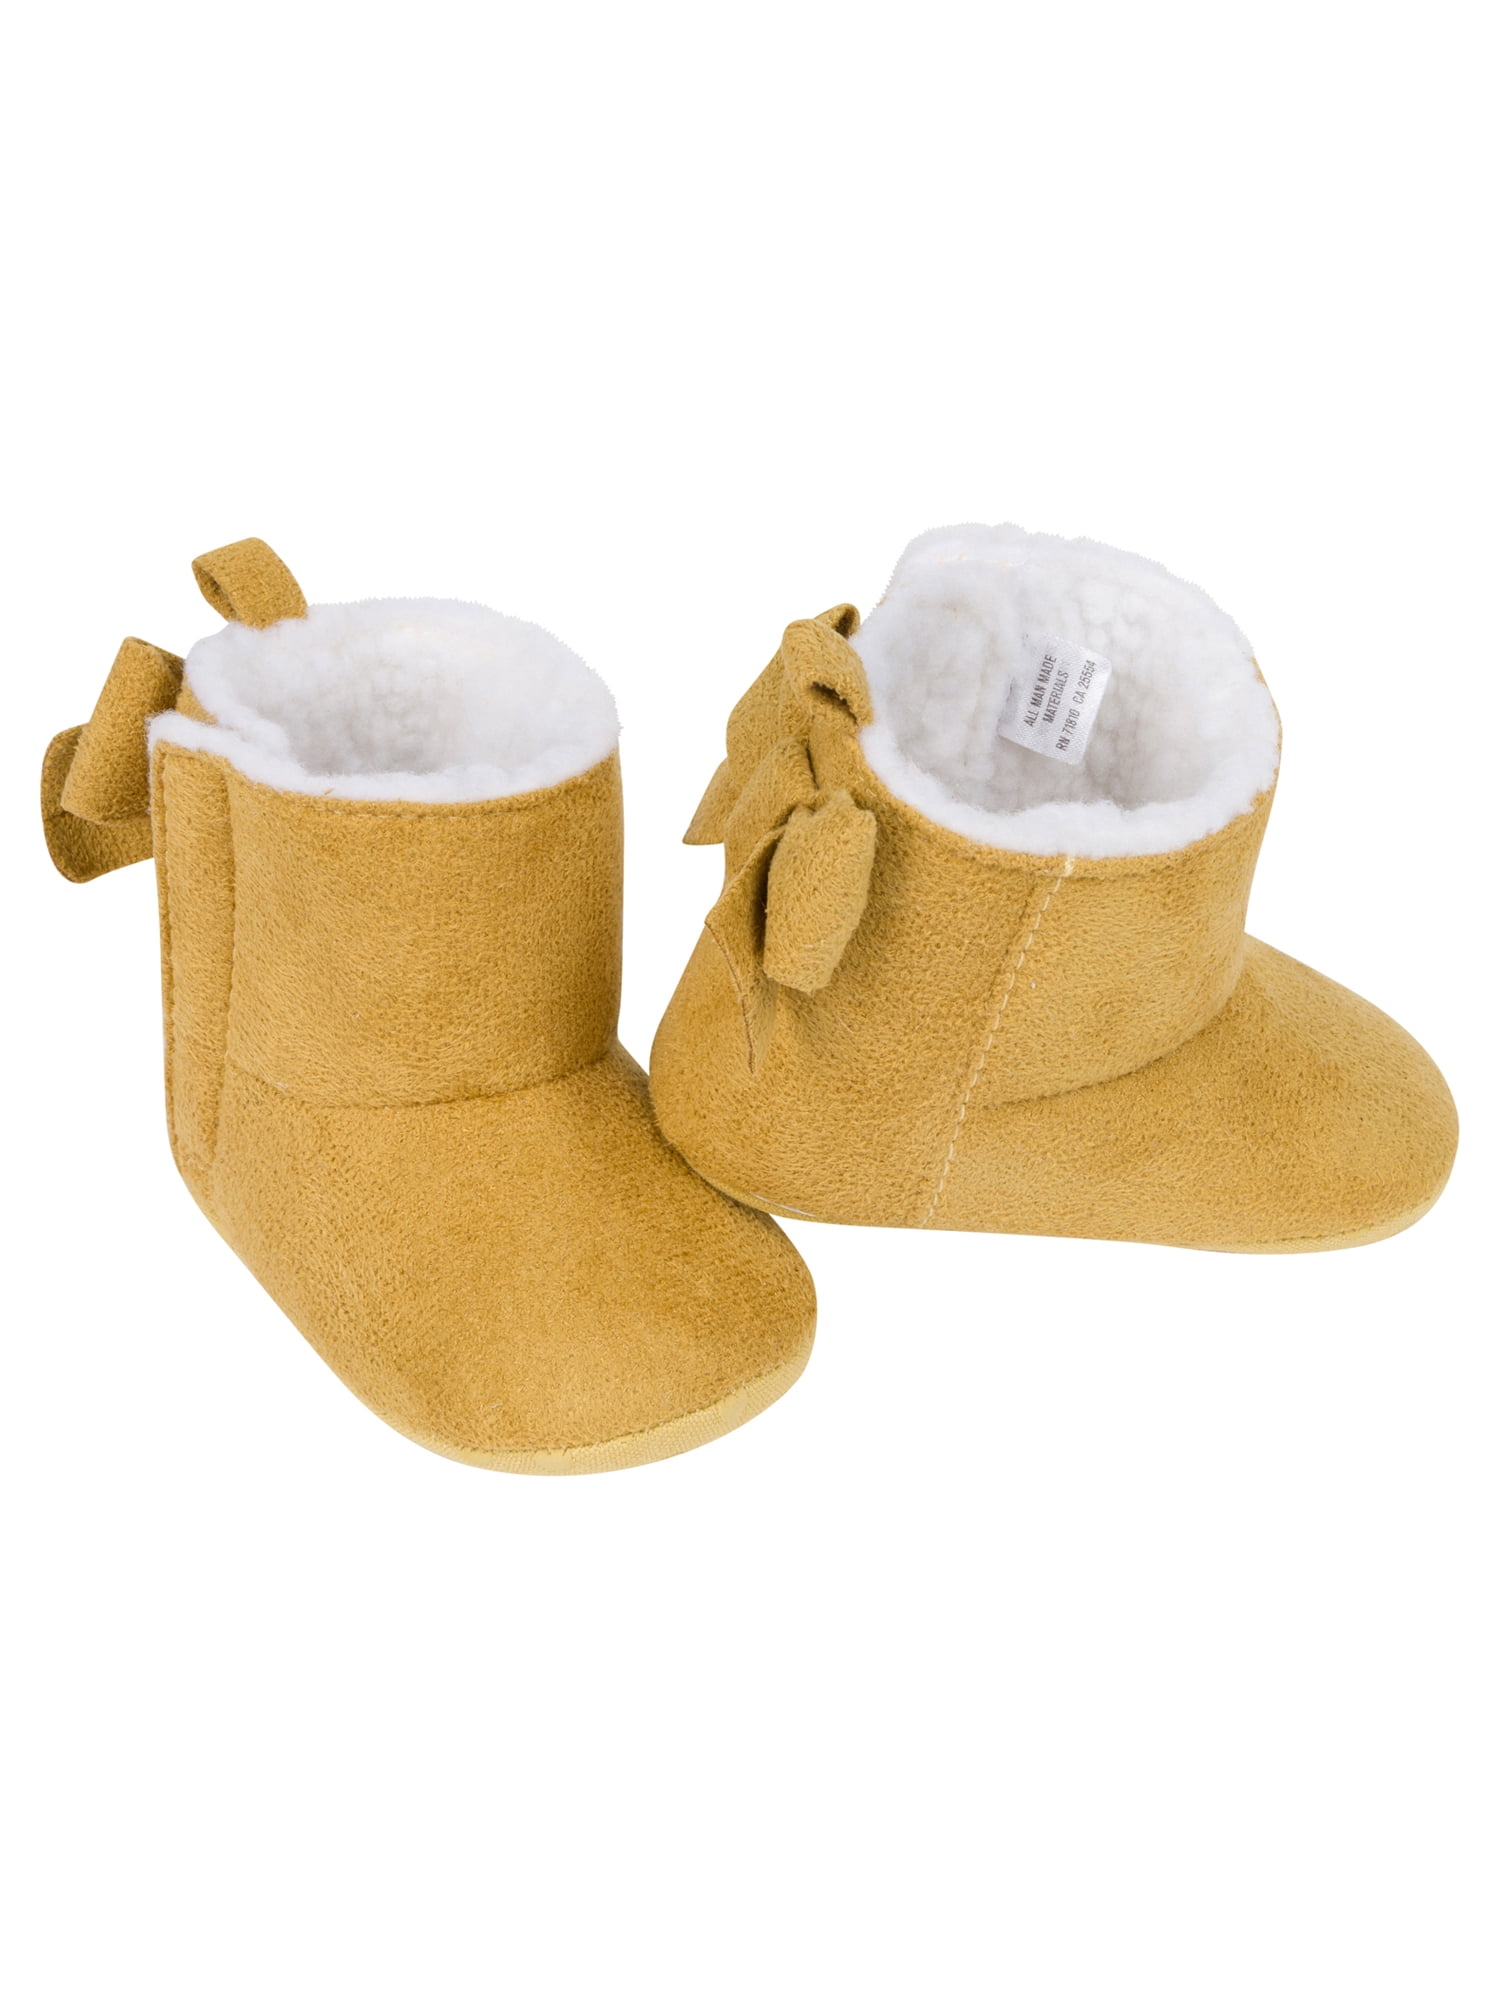 NEW BABY GAP SHERPA SUEDE BOOTIES BOOTS SHOES BABY 0-3 MONTHS 